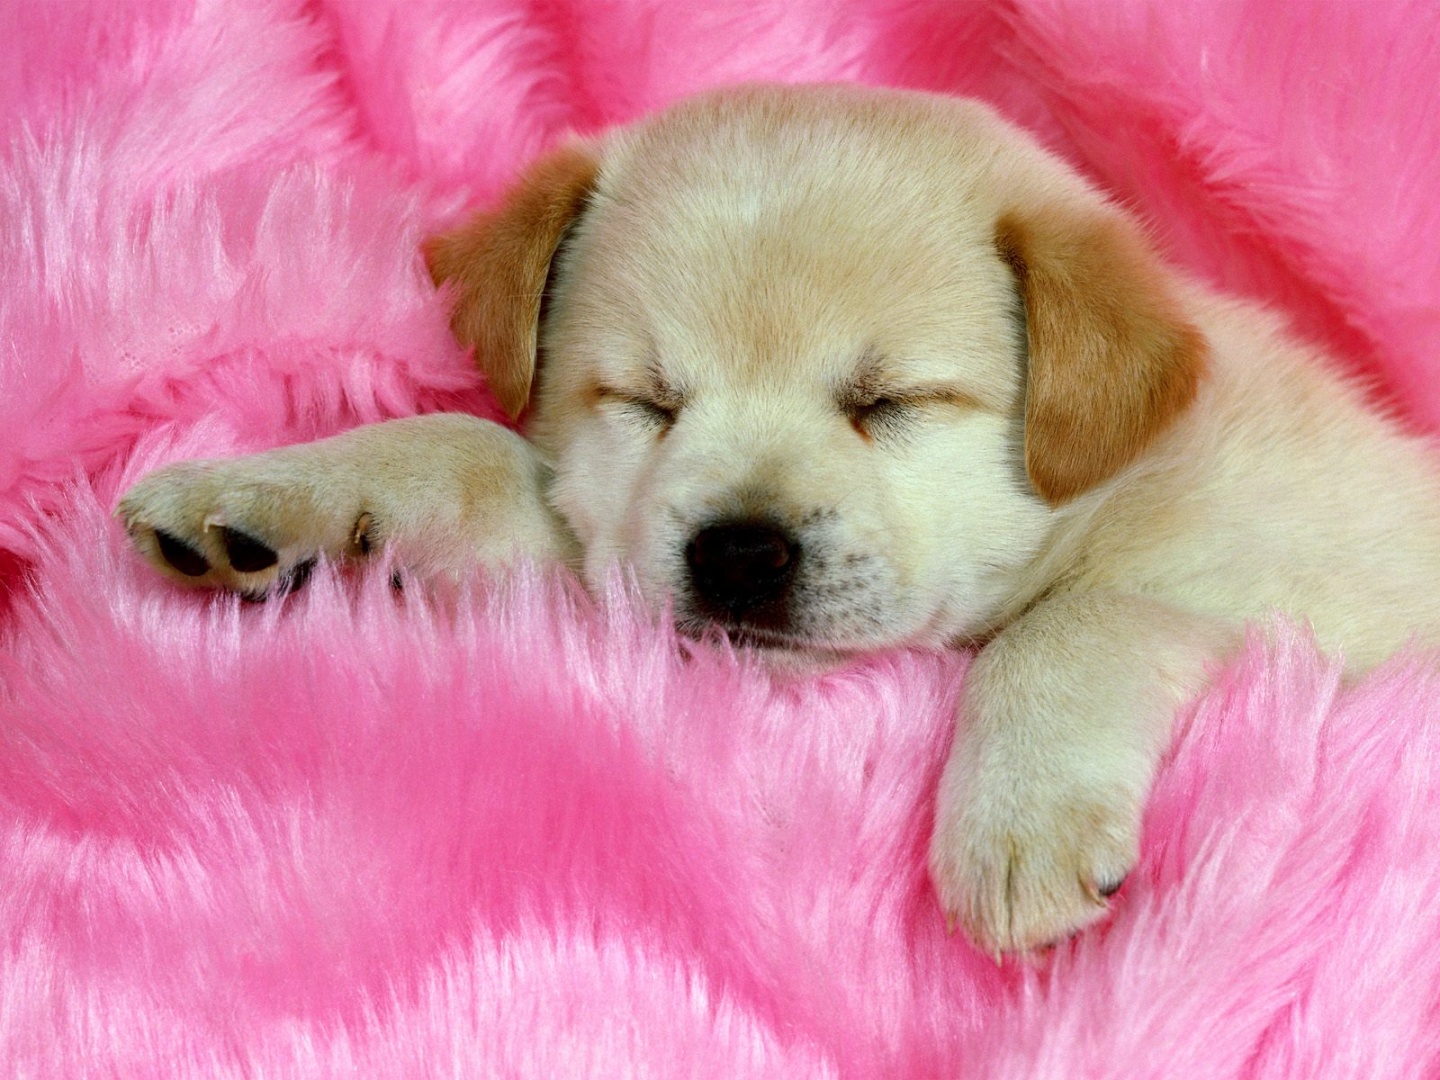 Cute Puppies Sleeping HD Wallpaper Background Images